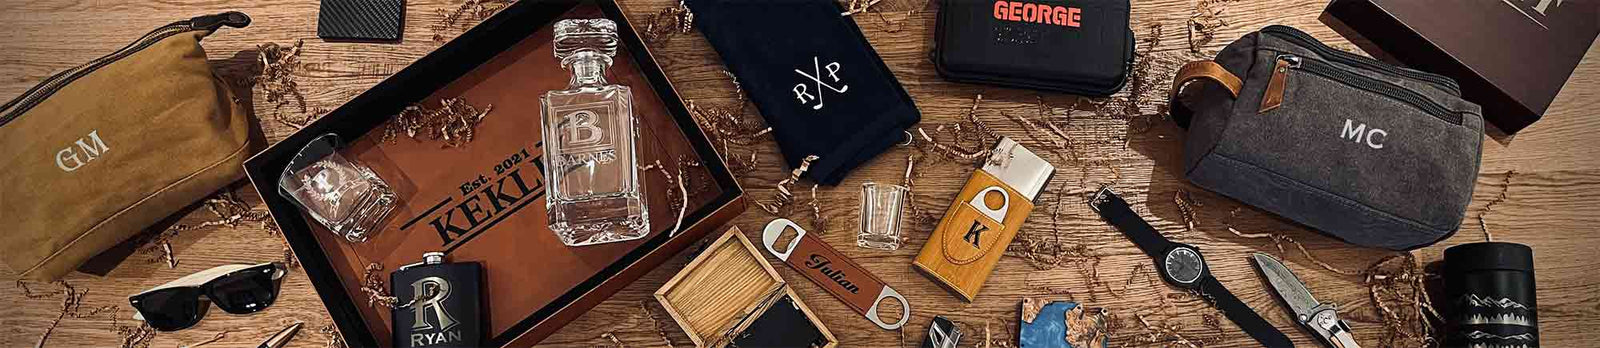 50 Best 10 Year Anniversary Gifts for Him (from $22.99) - Groovy Guy Gifts